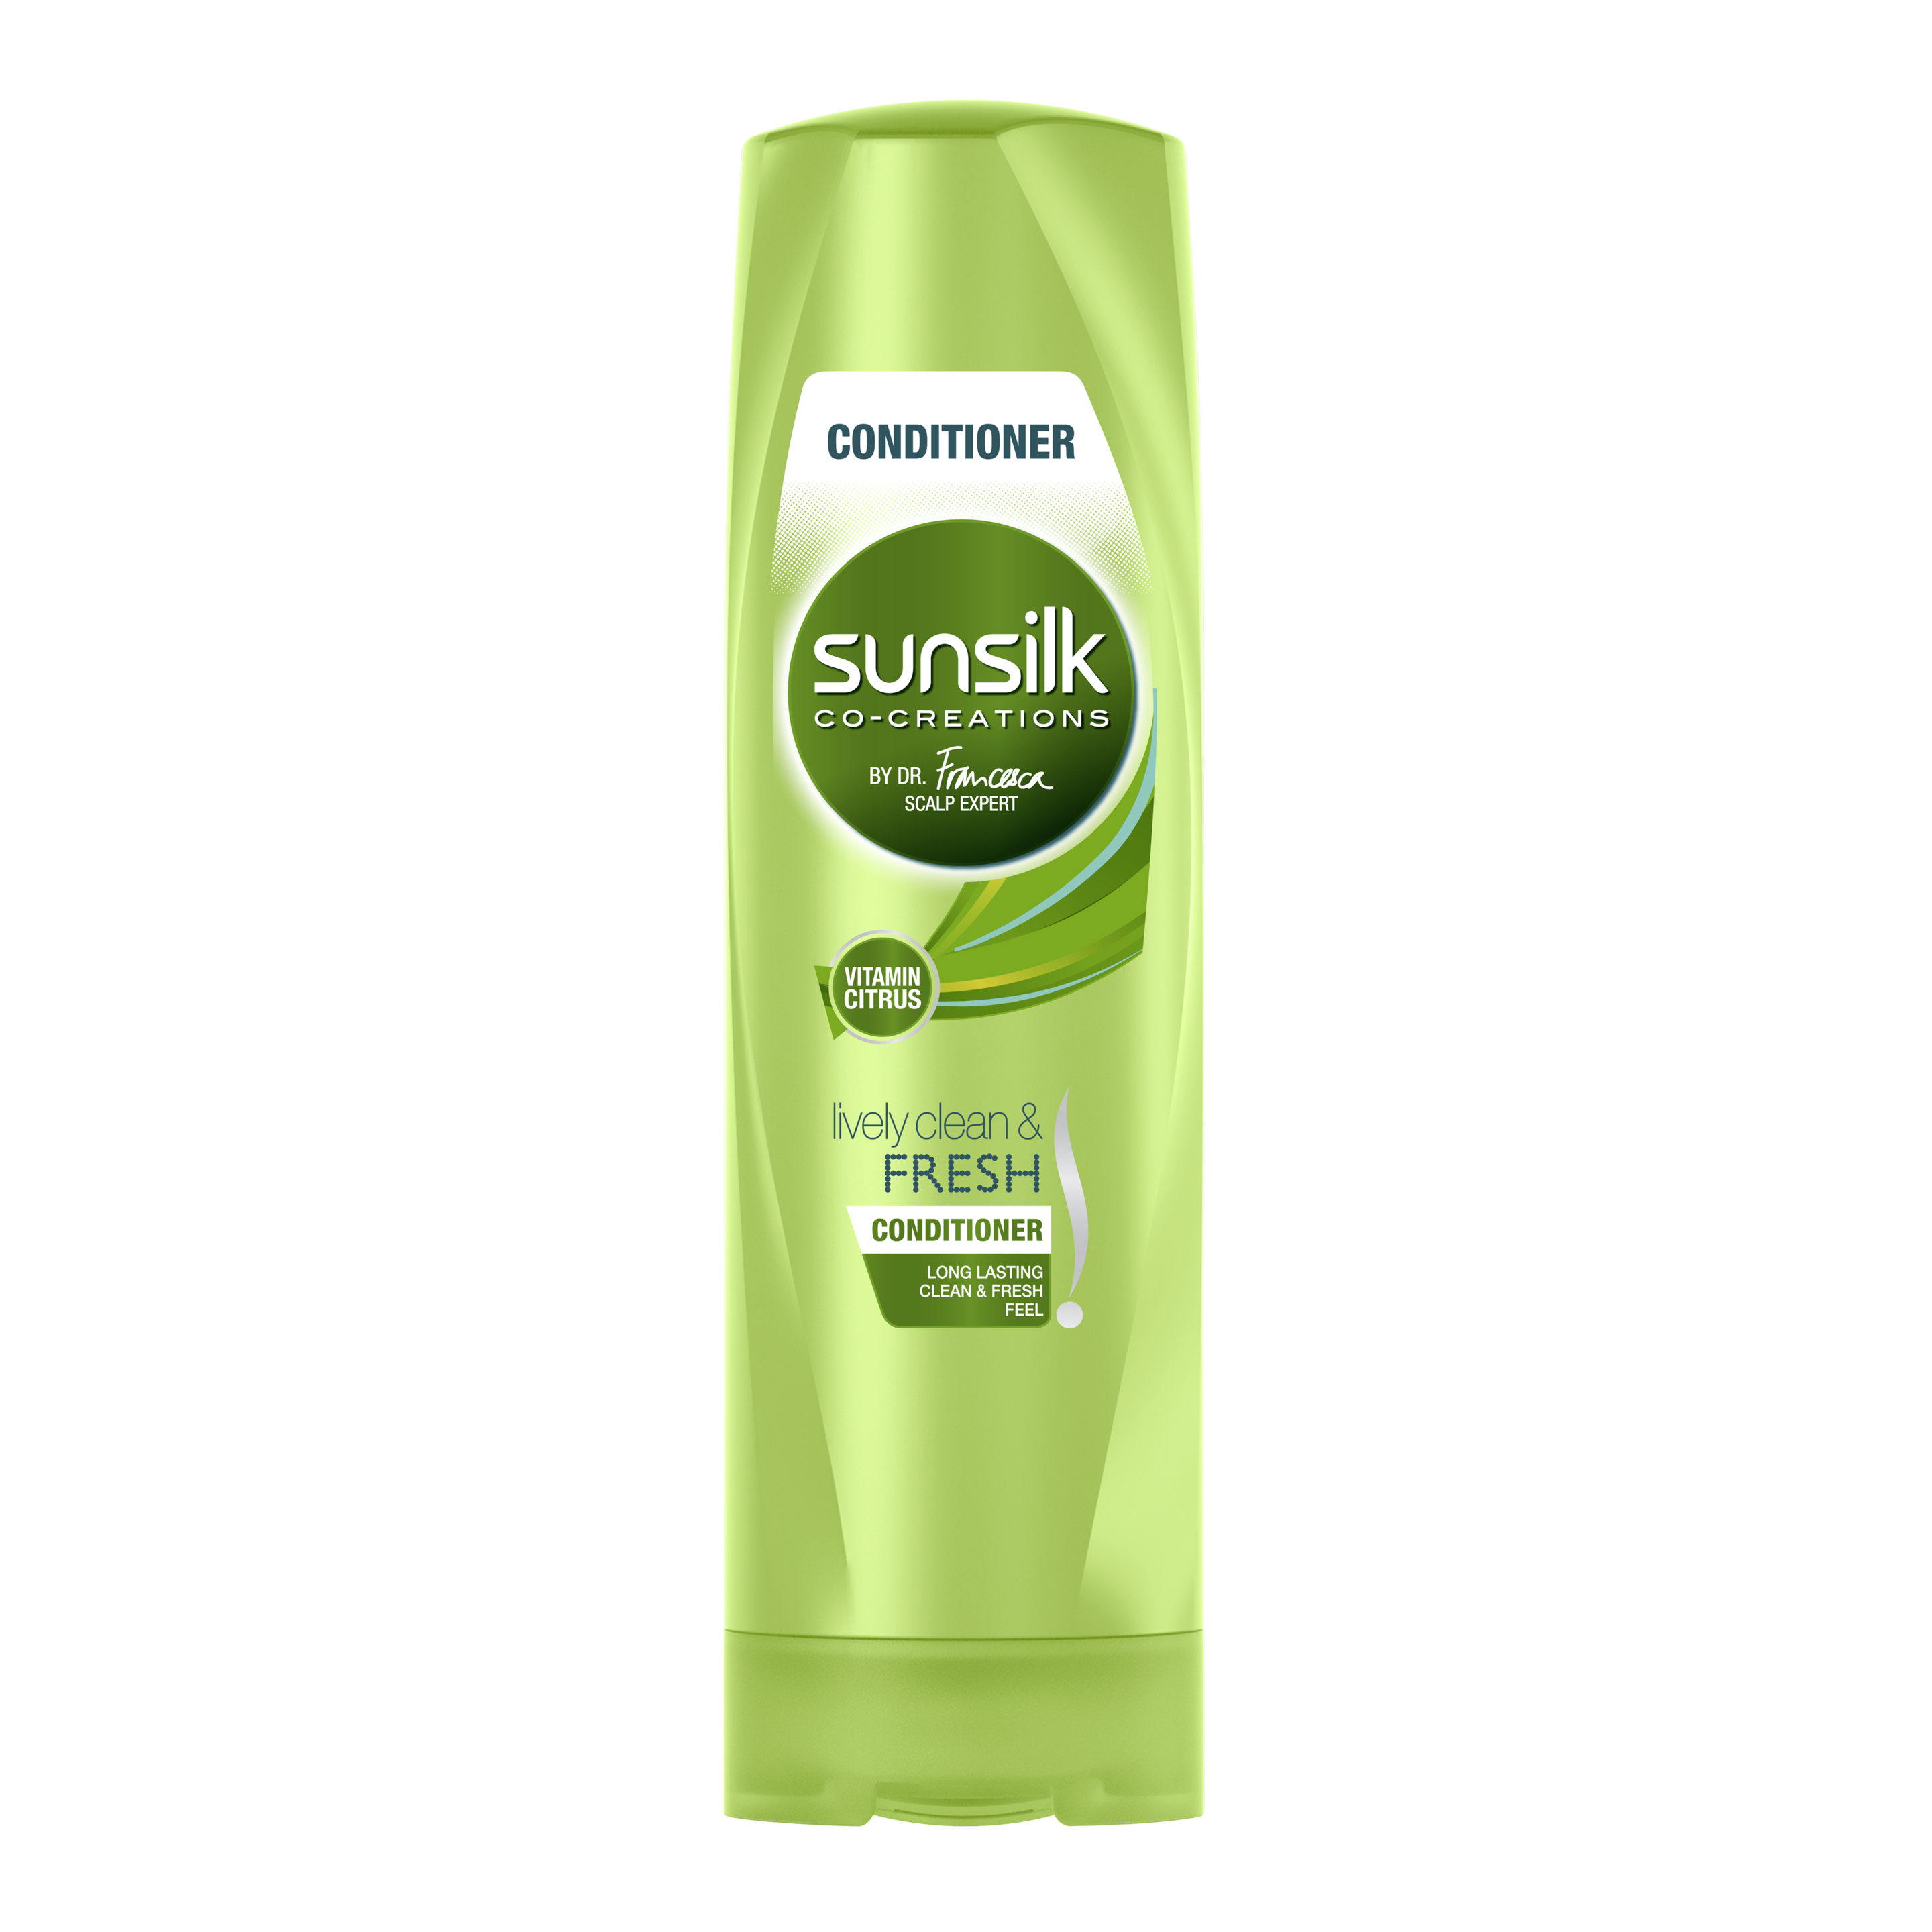 Sunsilk Lively Clean and Fresh Conditioner 320ml front of pack image